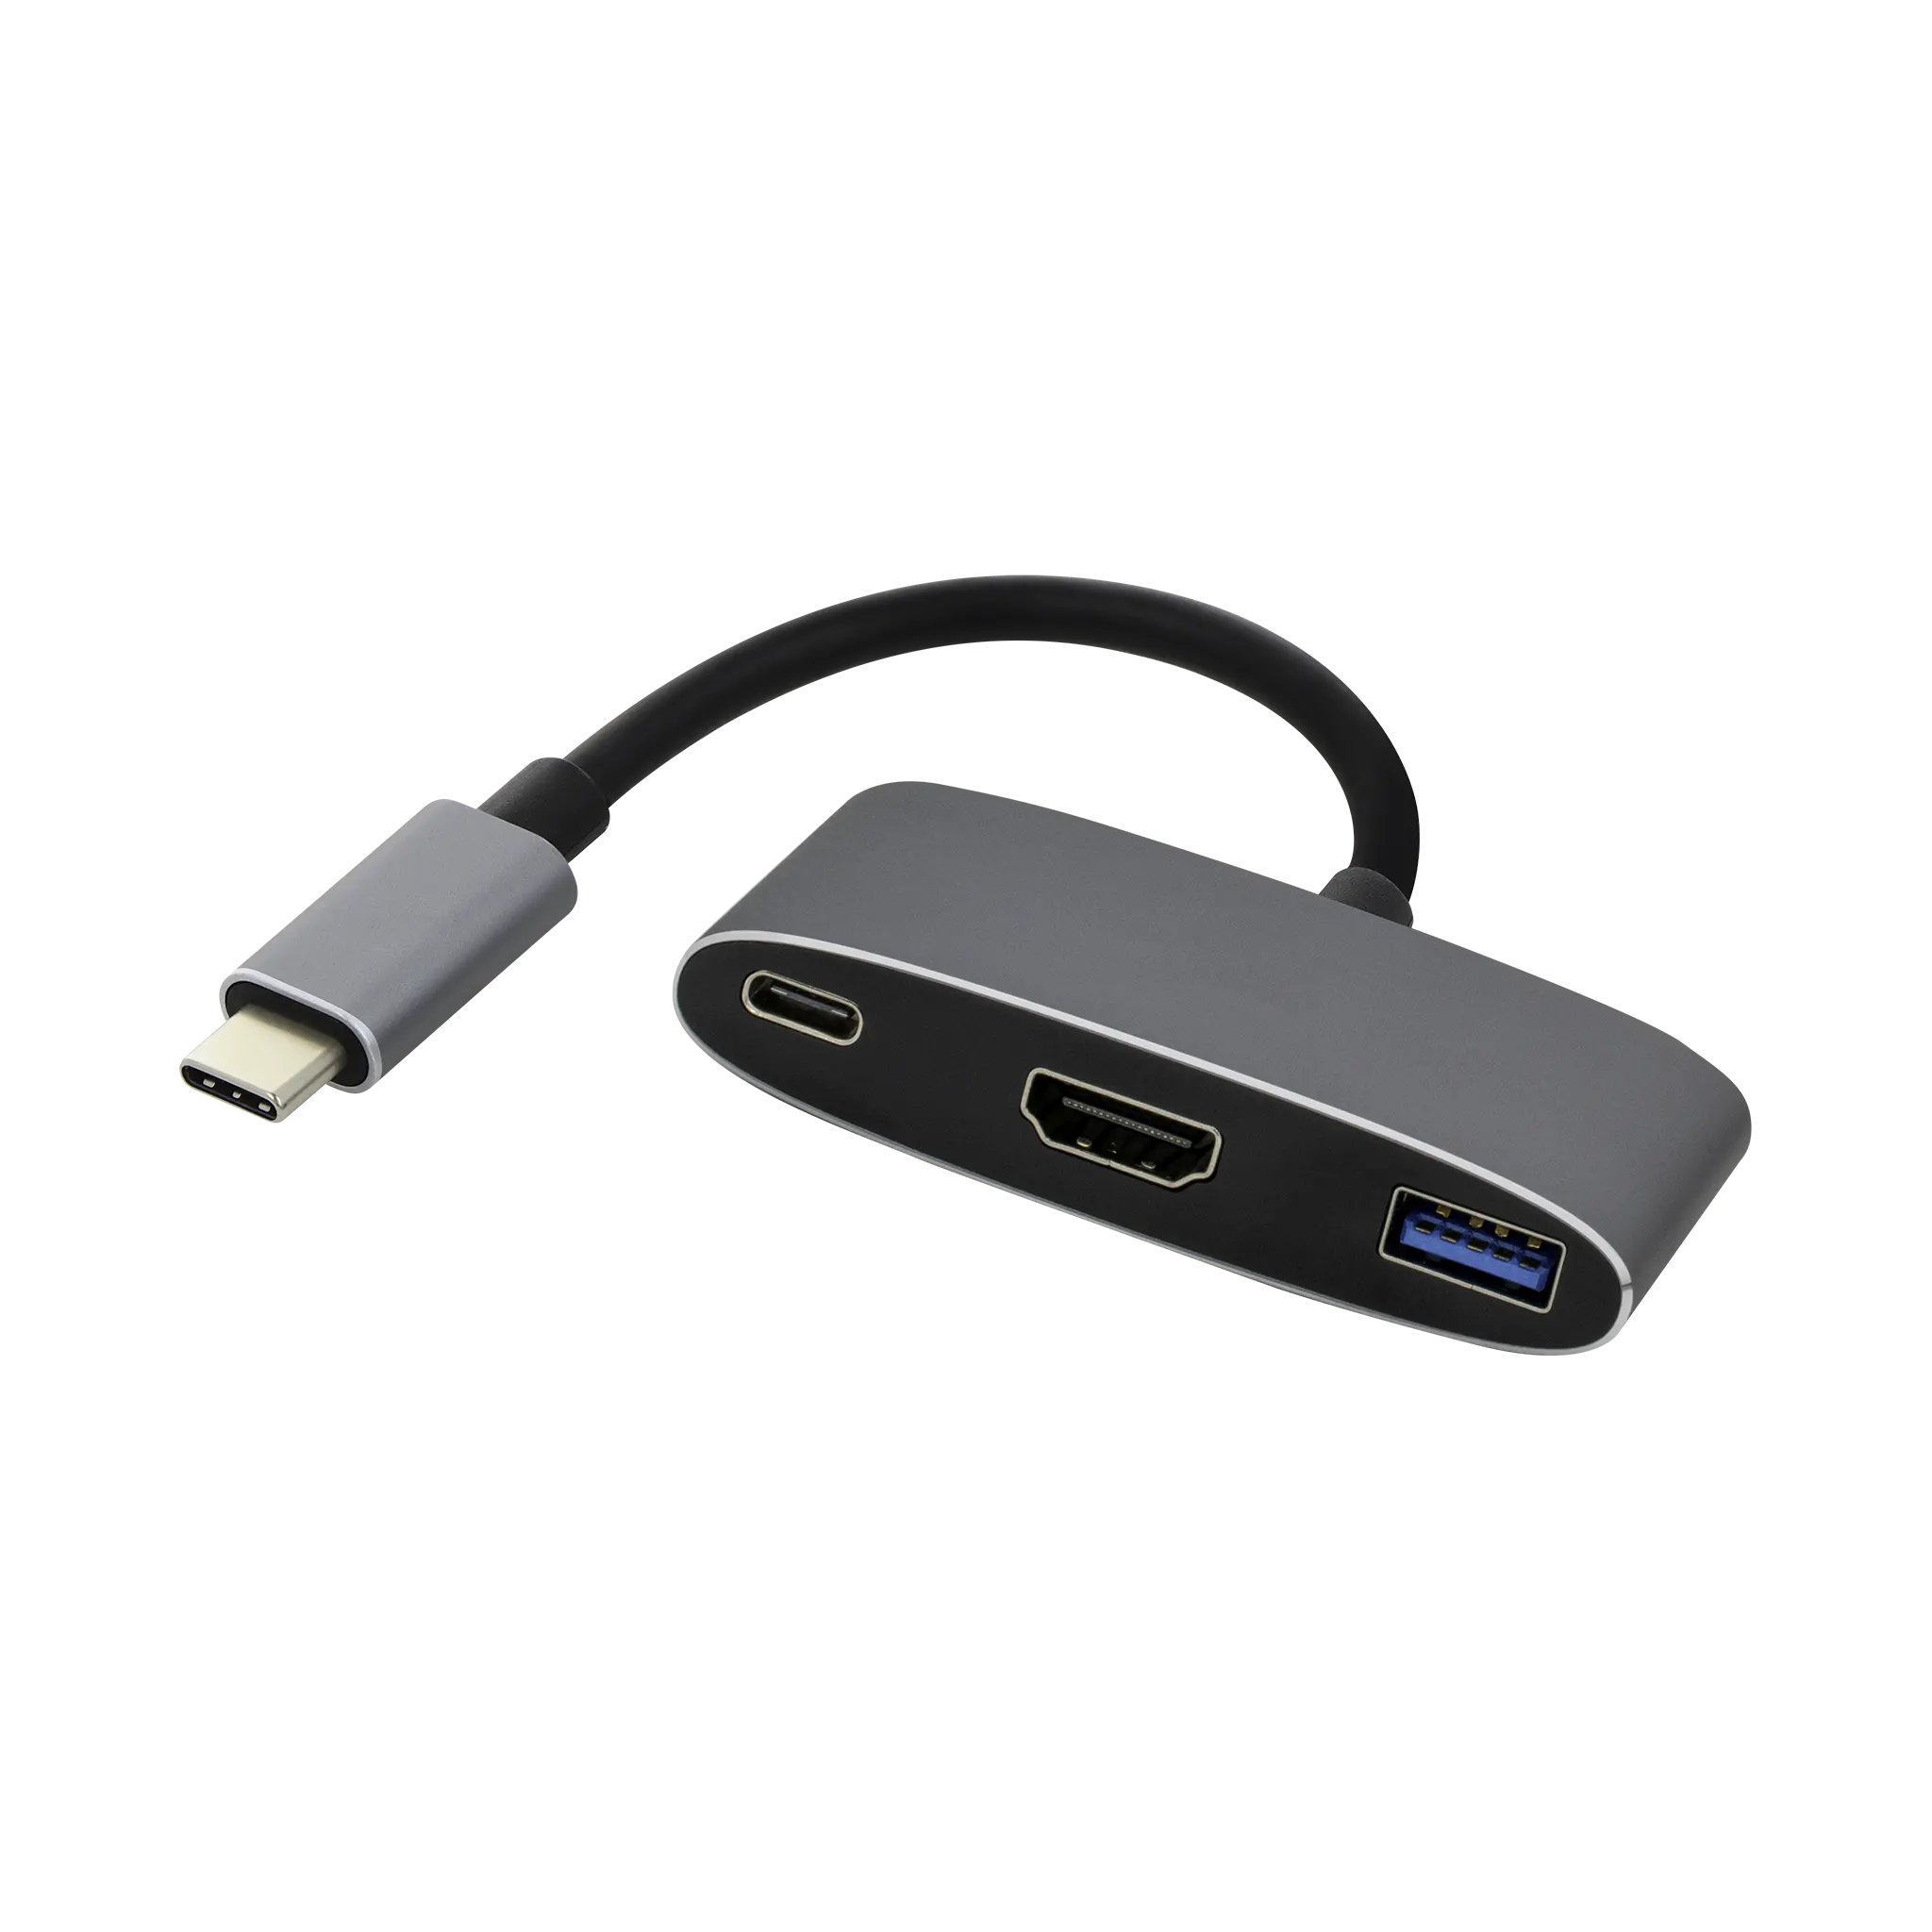 USB-C to HDMI, USB and USB-C with Power Delivery Adapter –